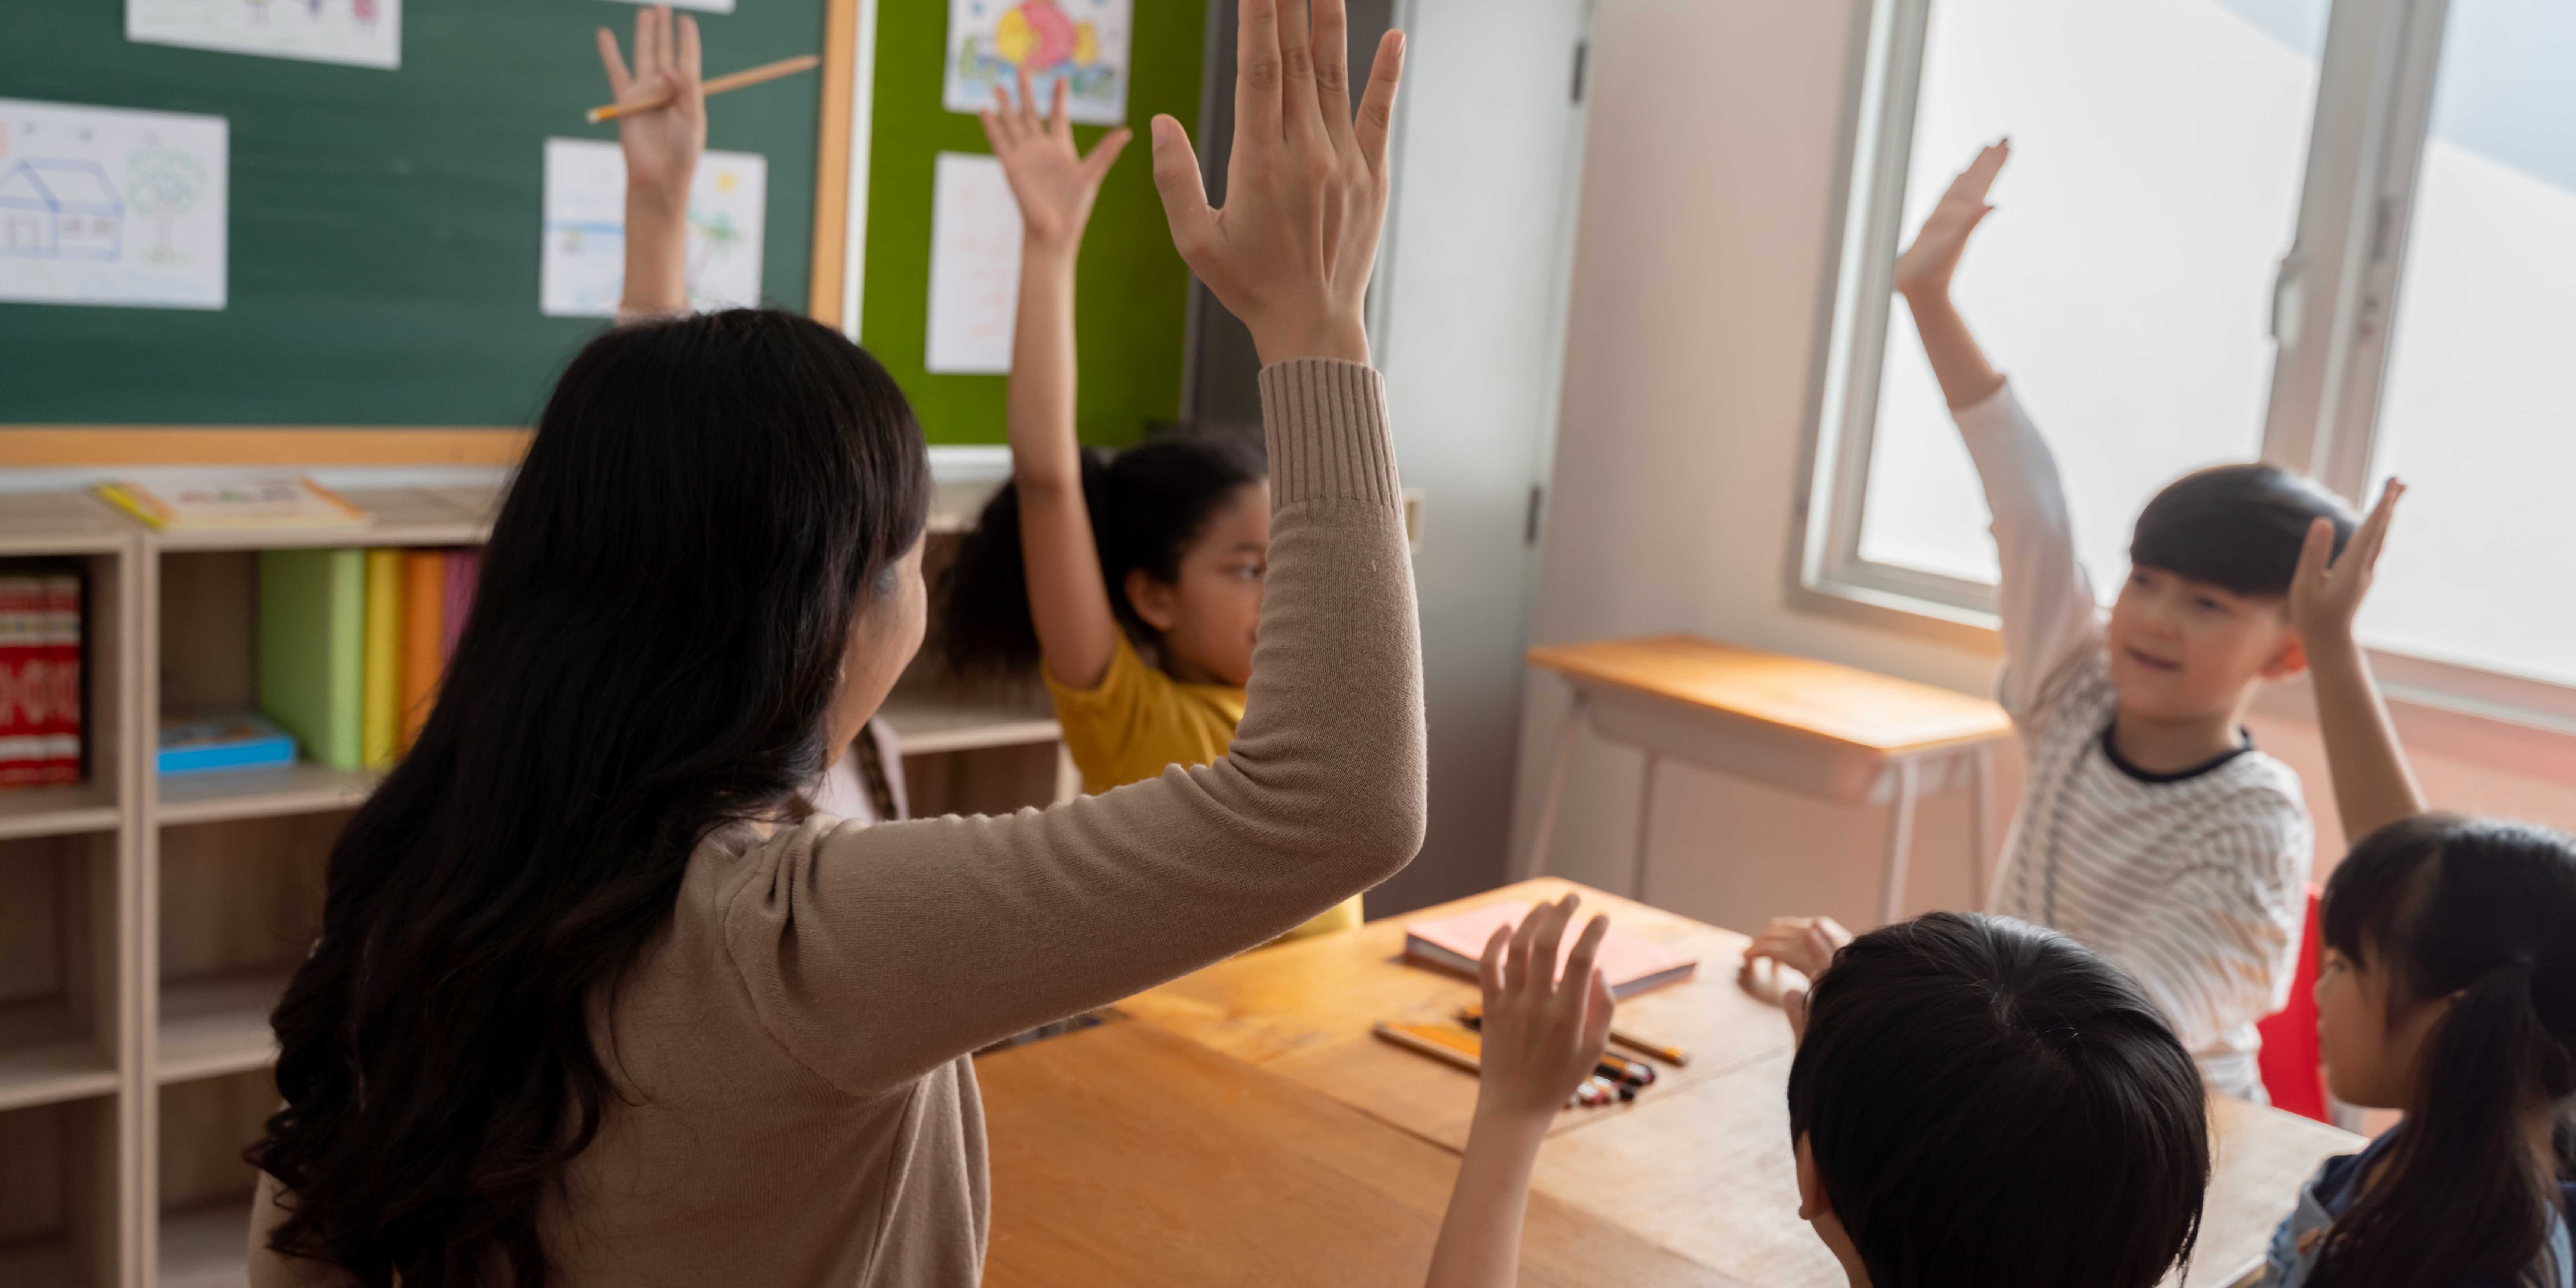 Kids raising their hands in classroom - co-creating norms